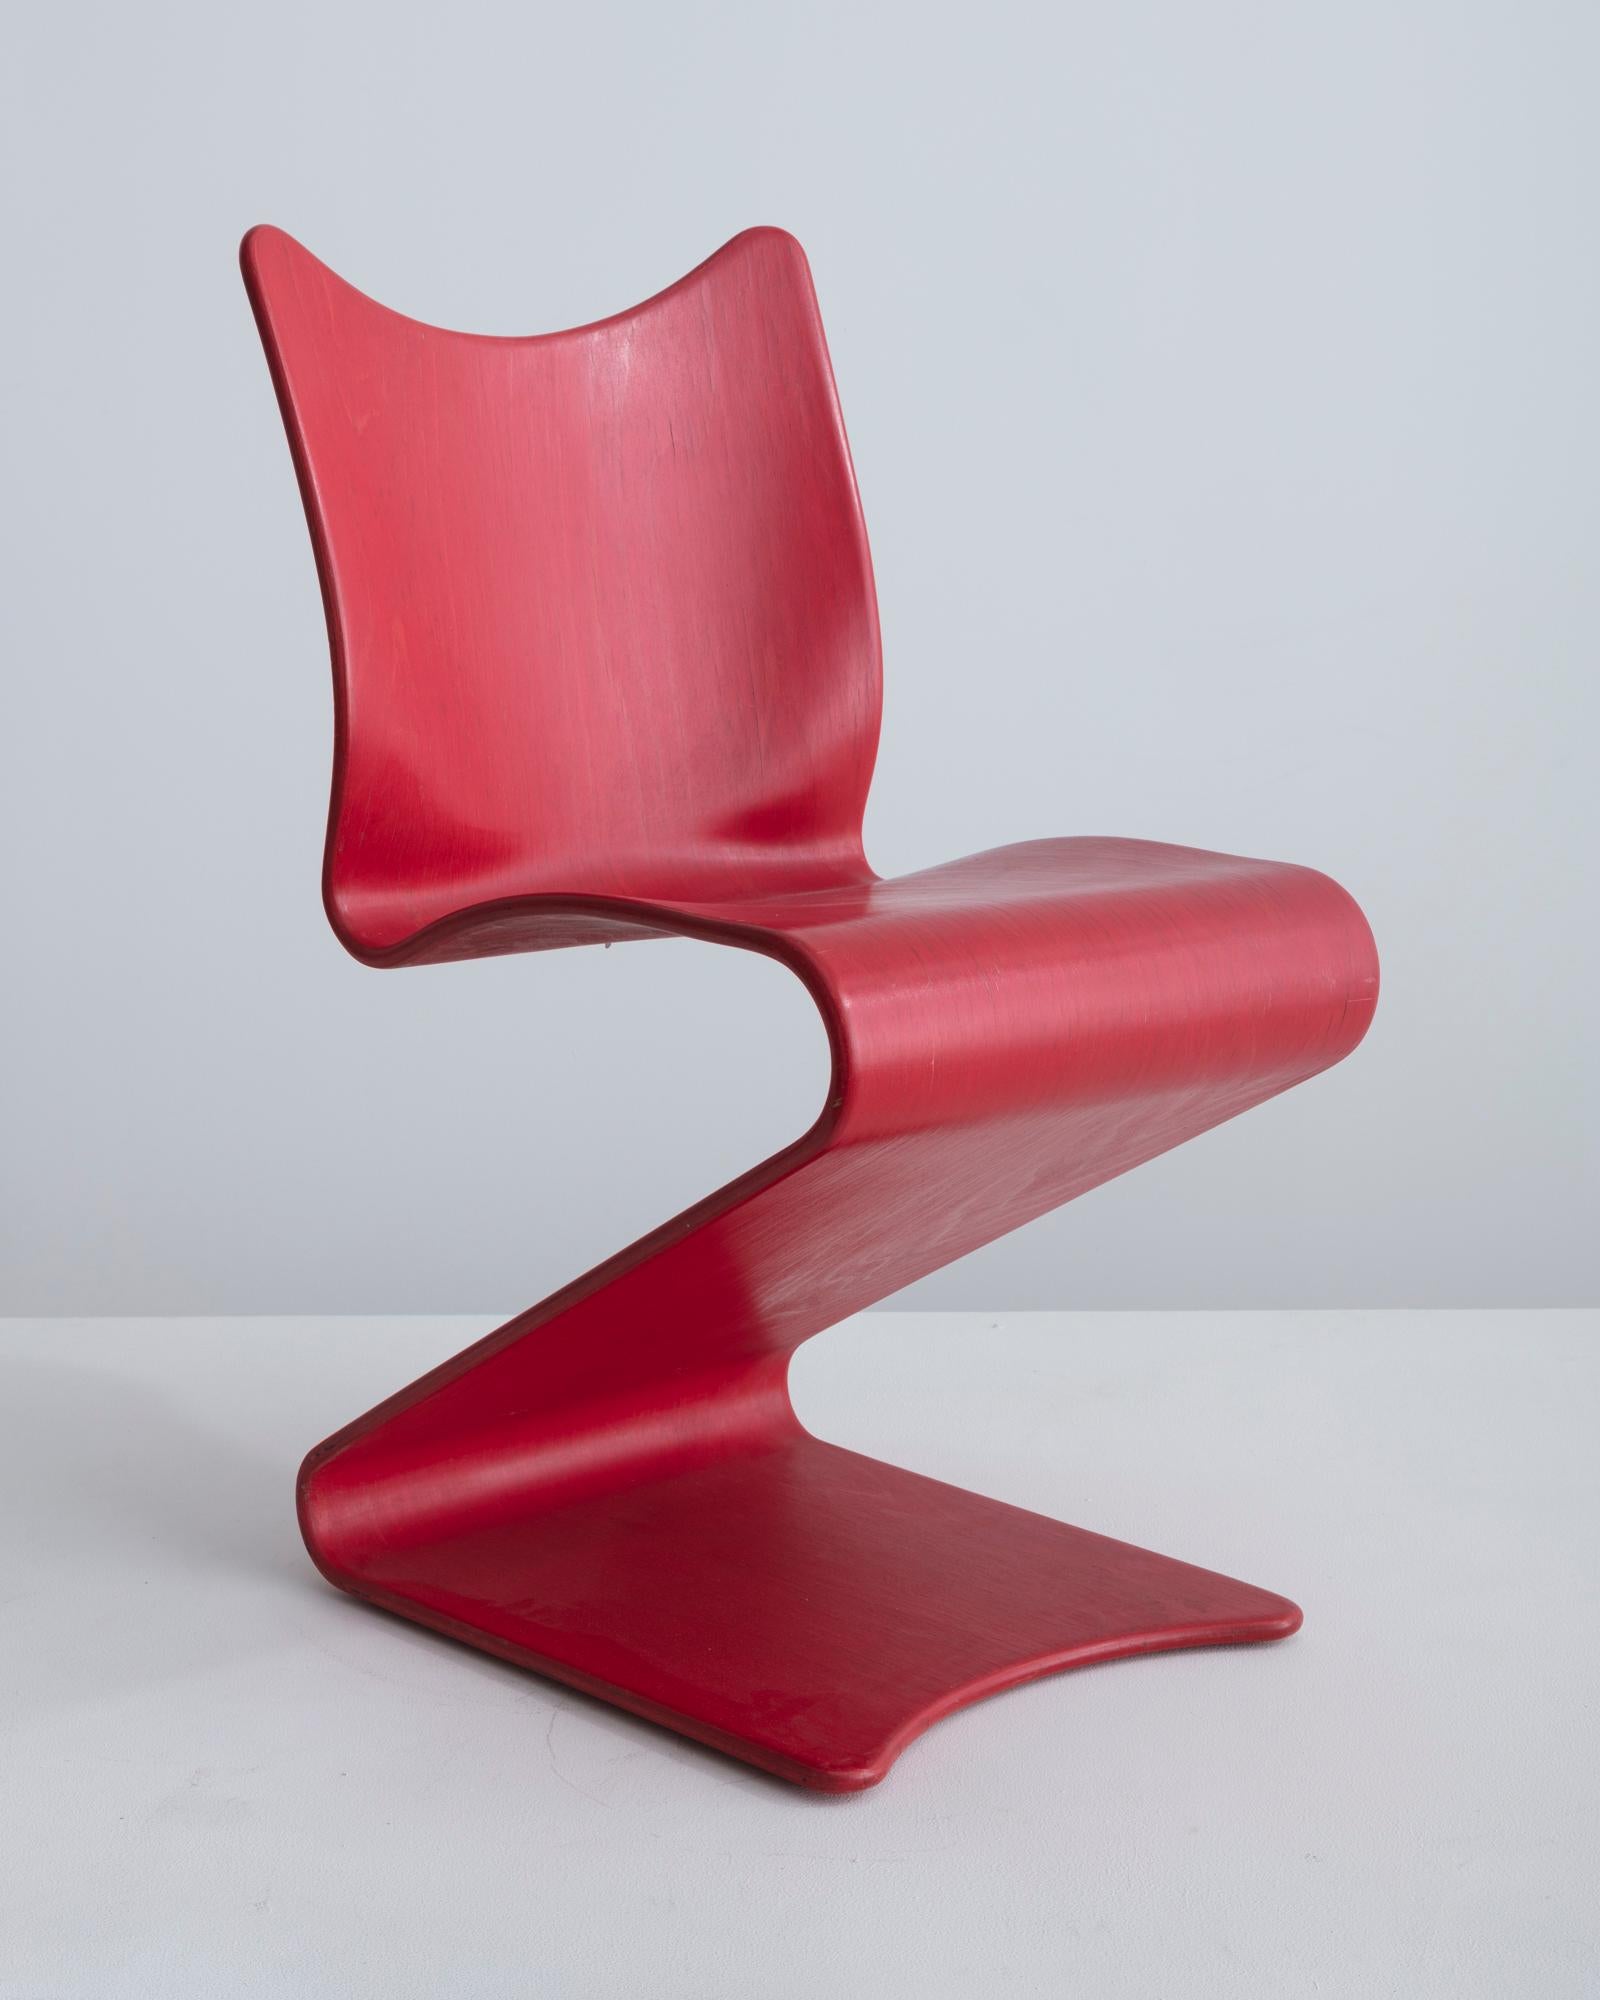 Verner Panton. S-chair, model 275. Designed 1956, this example manufactured ca. 1965. Manufactured by A. Sommer, Germany. Retailed by Thonet, Frankenberg, Germany. Aniline-dyed beech plywood.